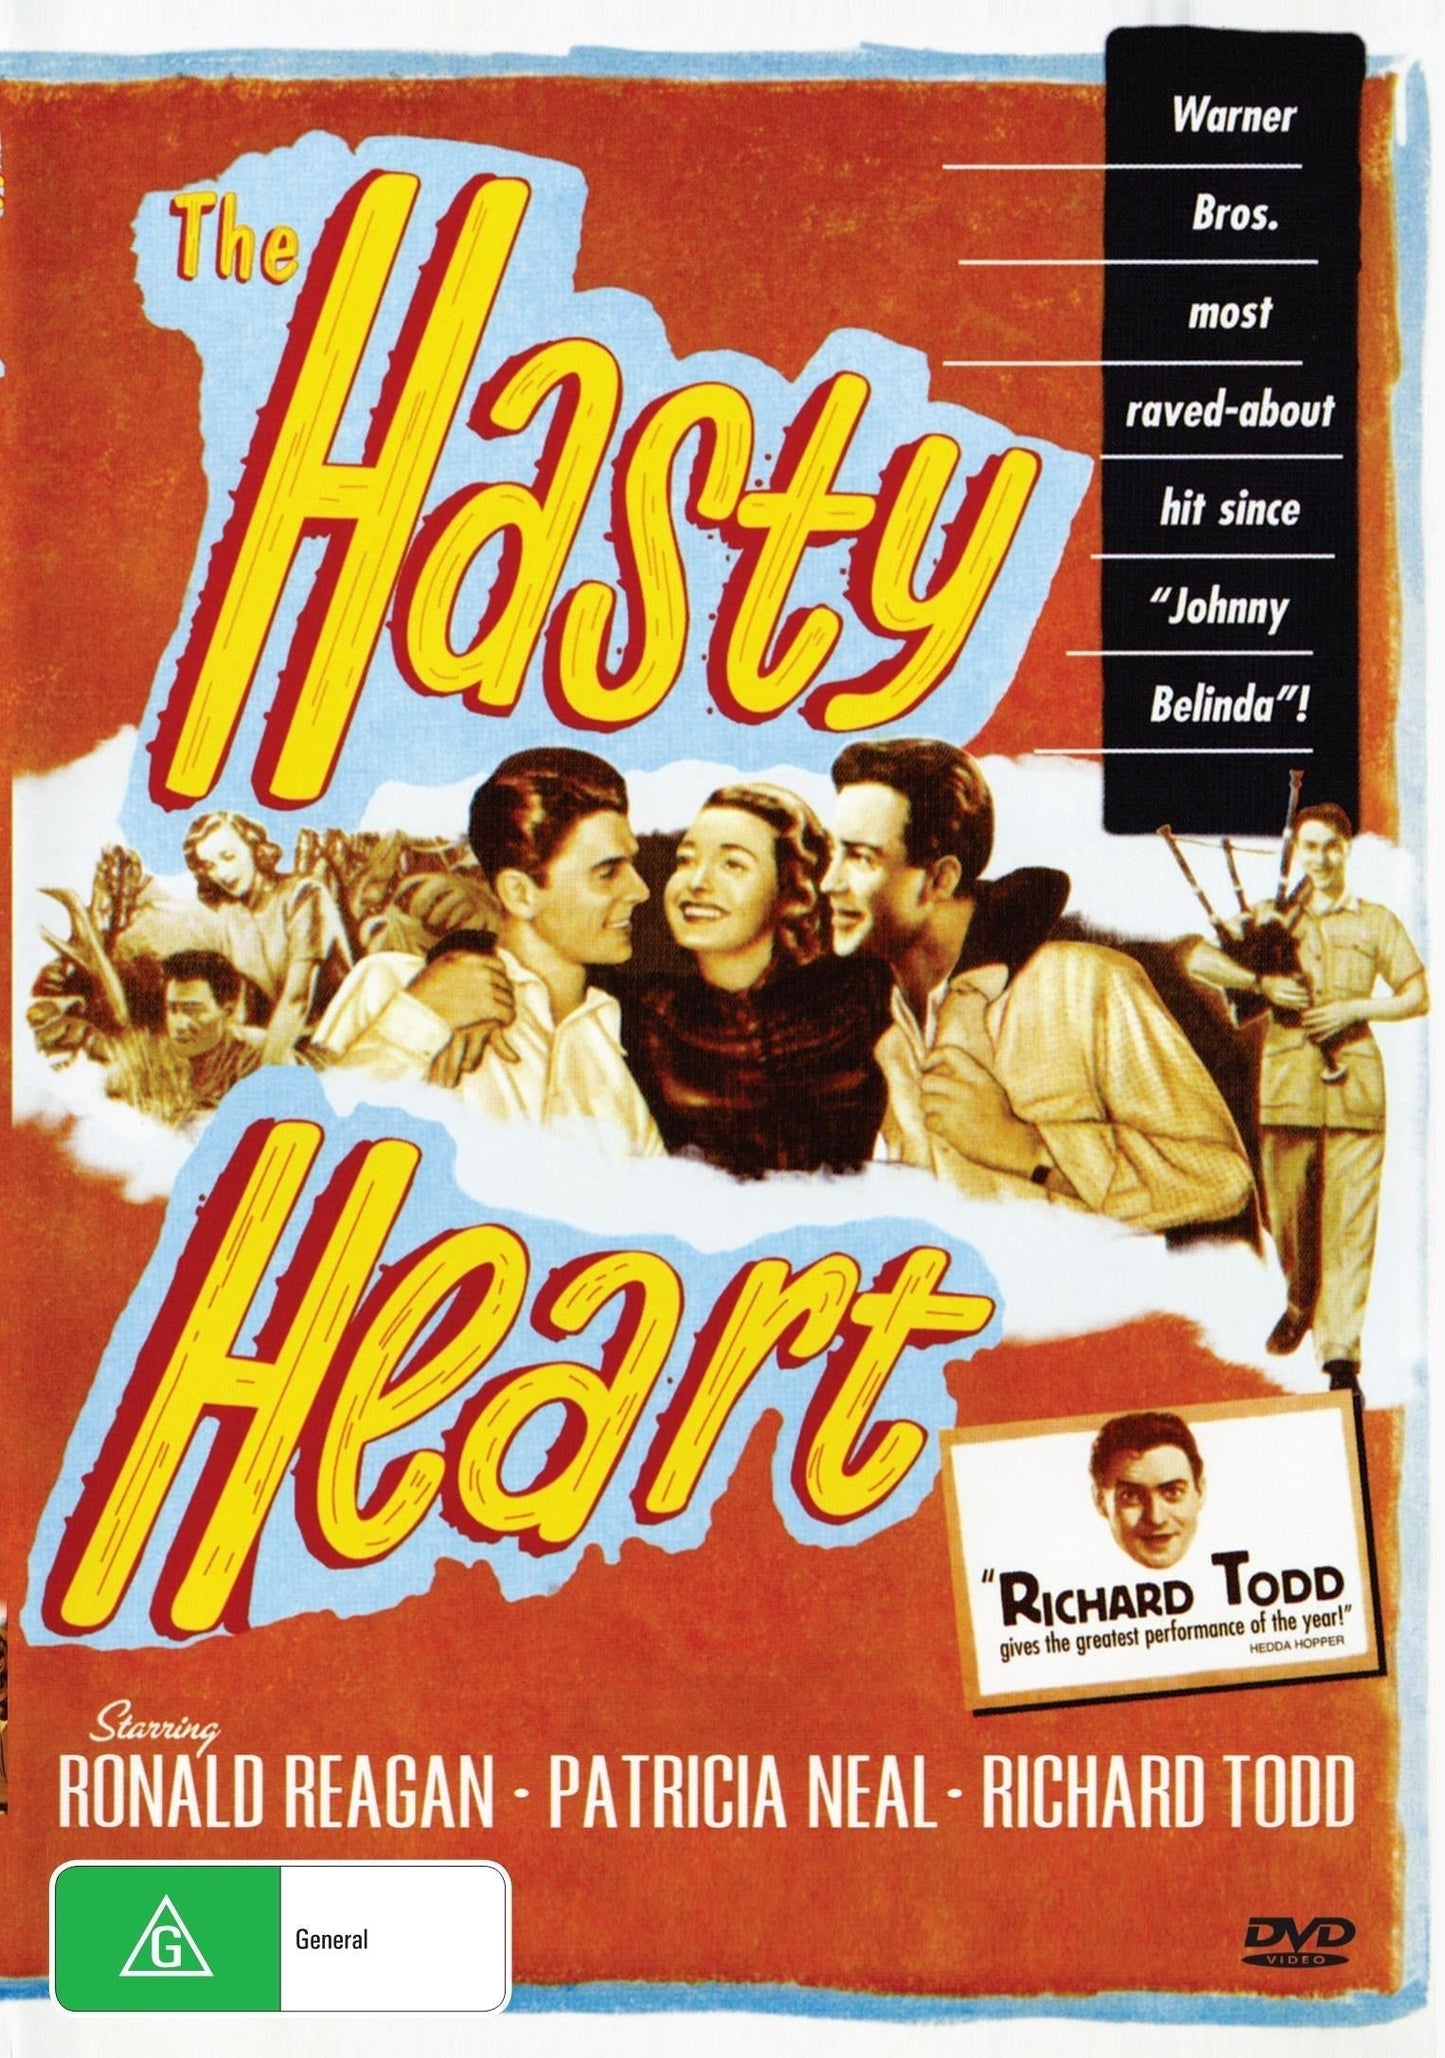 The Hasty Heart rareandcollectibledvds